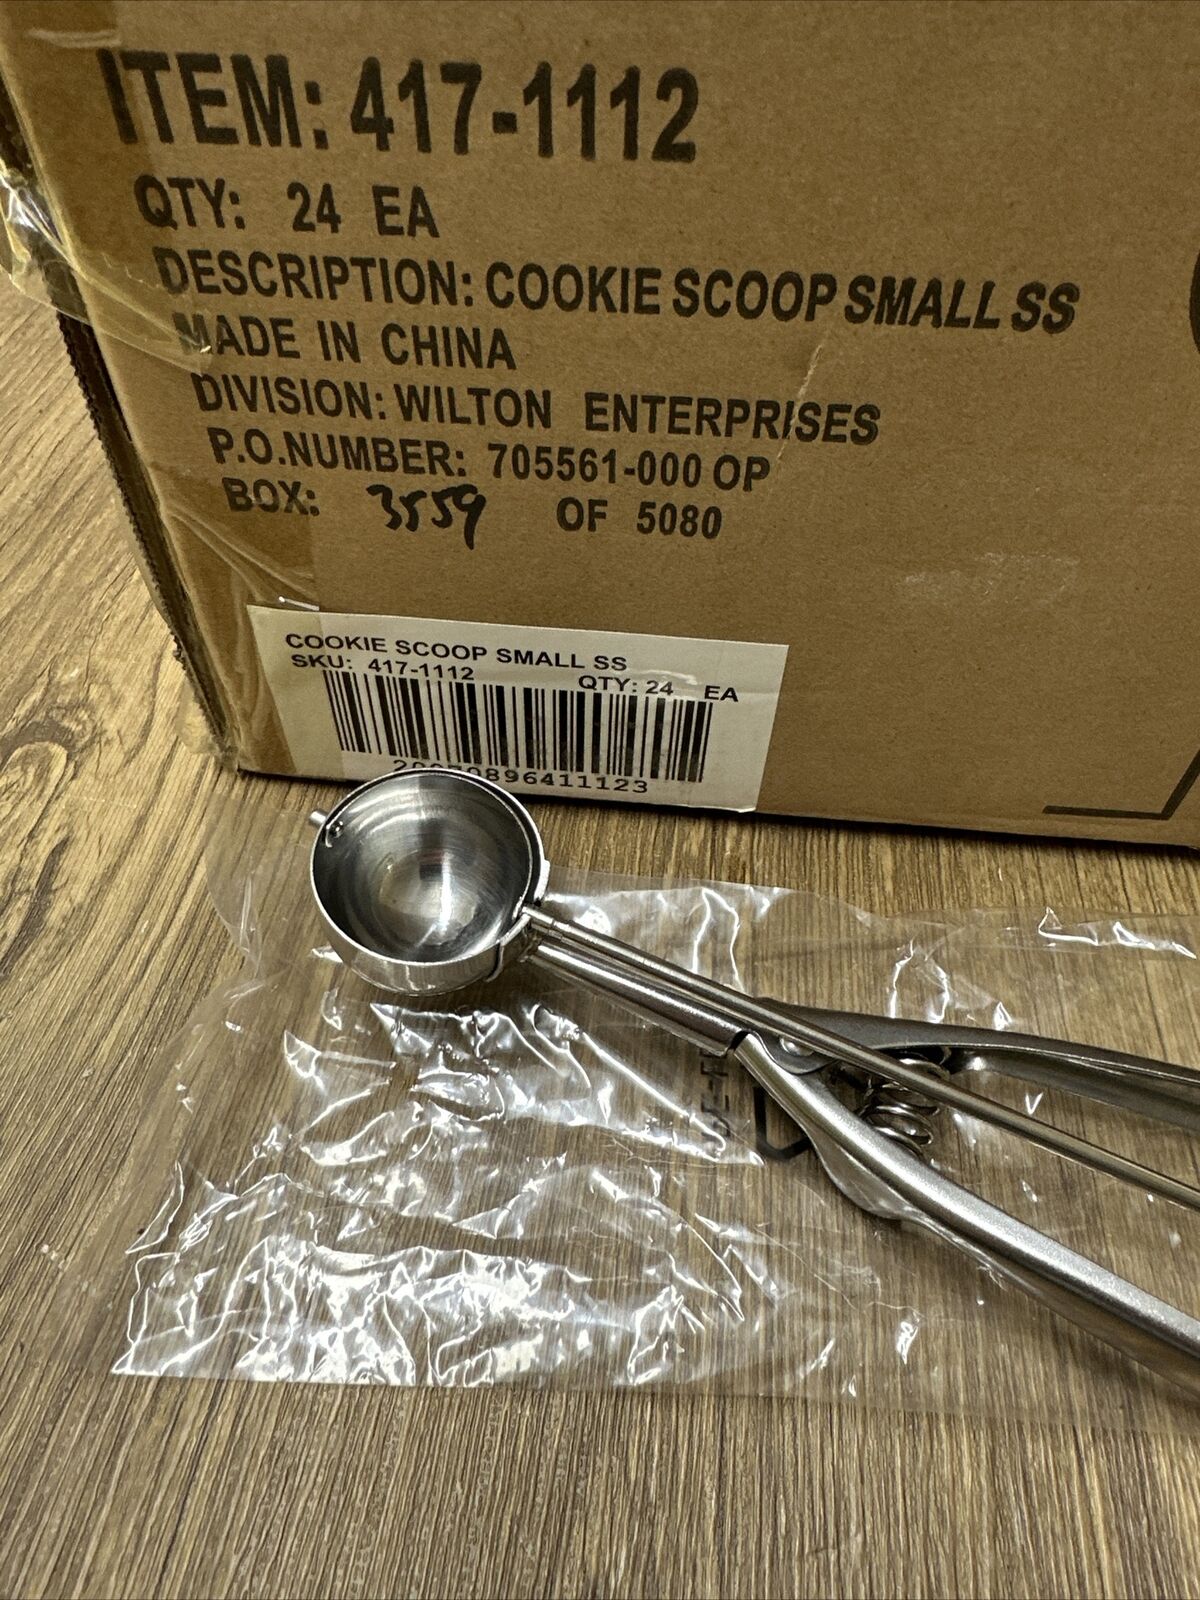 Wilton 417-1112 Stainless Steel Cookie Scoop, Small 4 tsp. Capacity